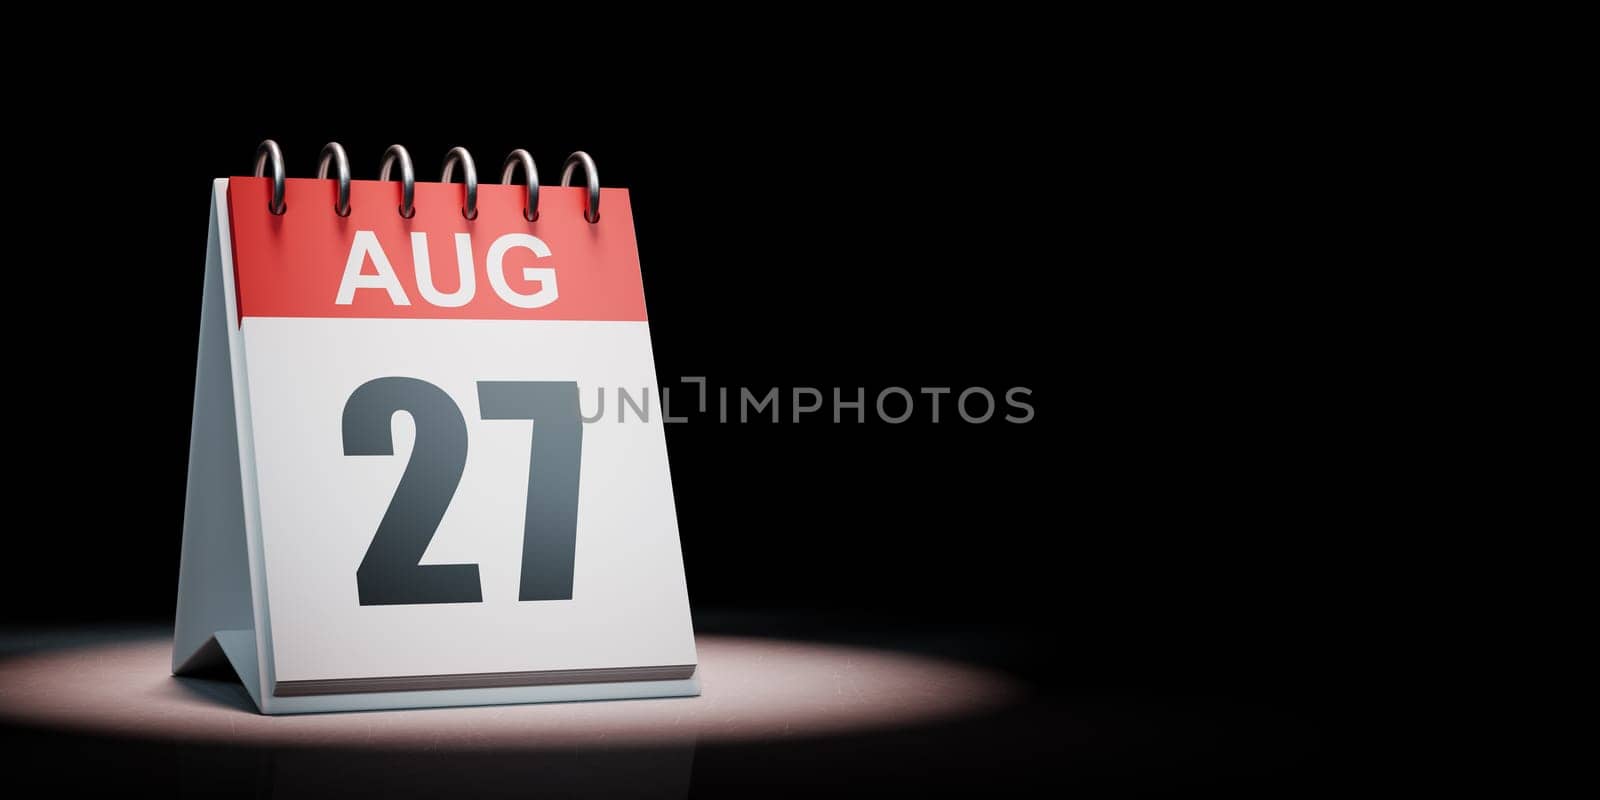 Red and White August 27 Desk Calendar Spotlighted on Black Background with Copy Space 3D Illustration